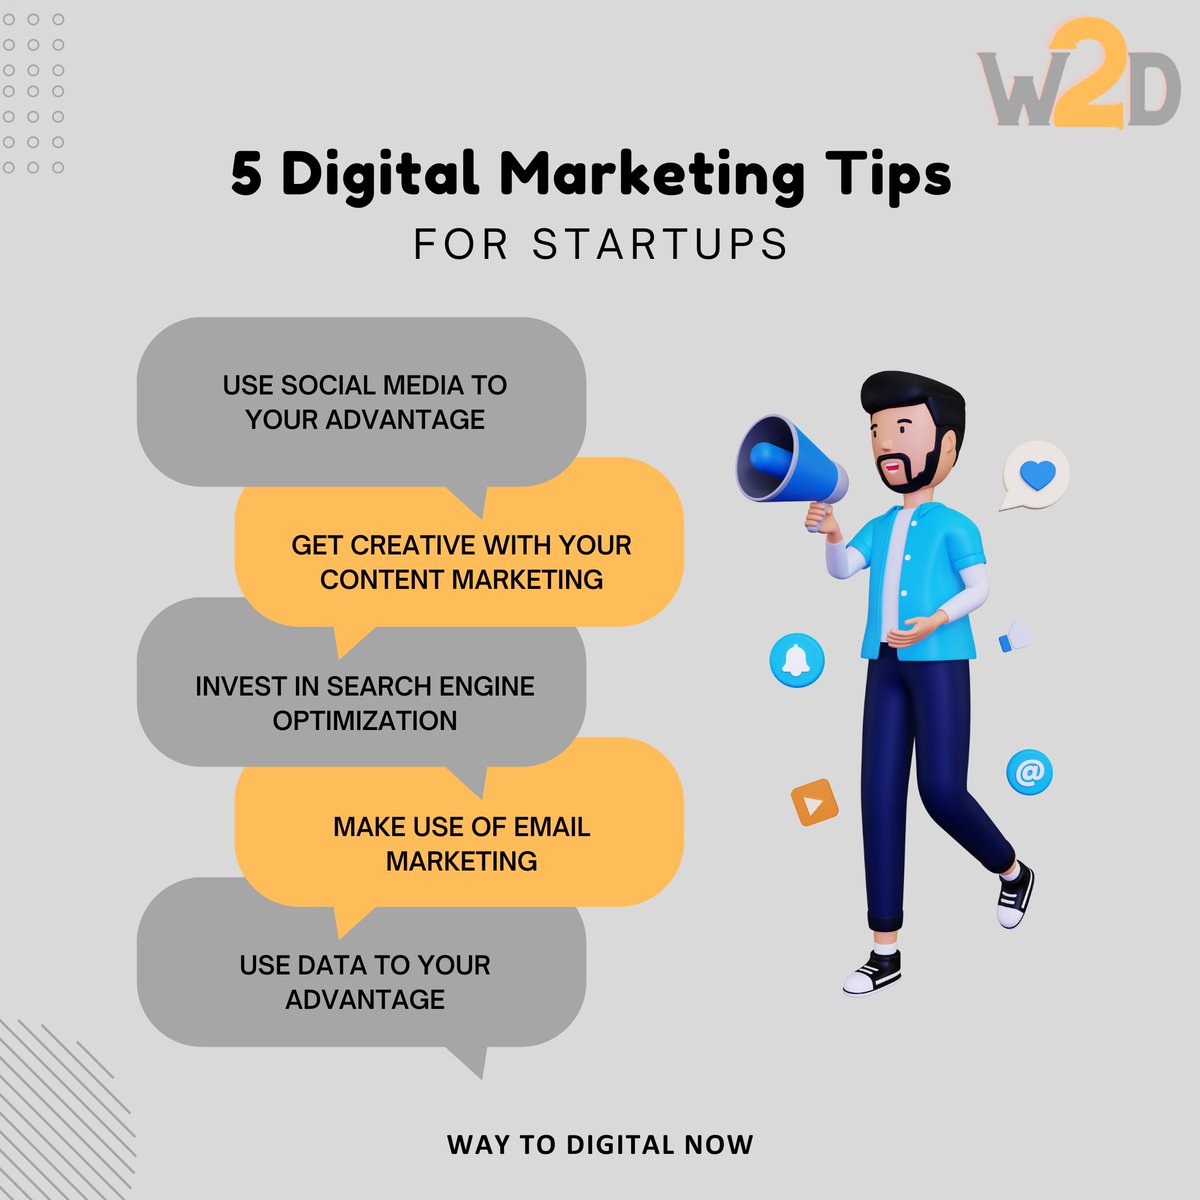 Empower Your Startup with These 5 Digital Marketing Tips! 💡 From crafting compelling content to leveraging social media, discover strategies to boost your brand's visibility and growth.
#DigitalMarketing #StartupTips #MarketingStrategy'